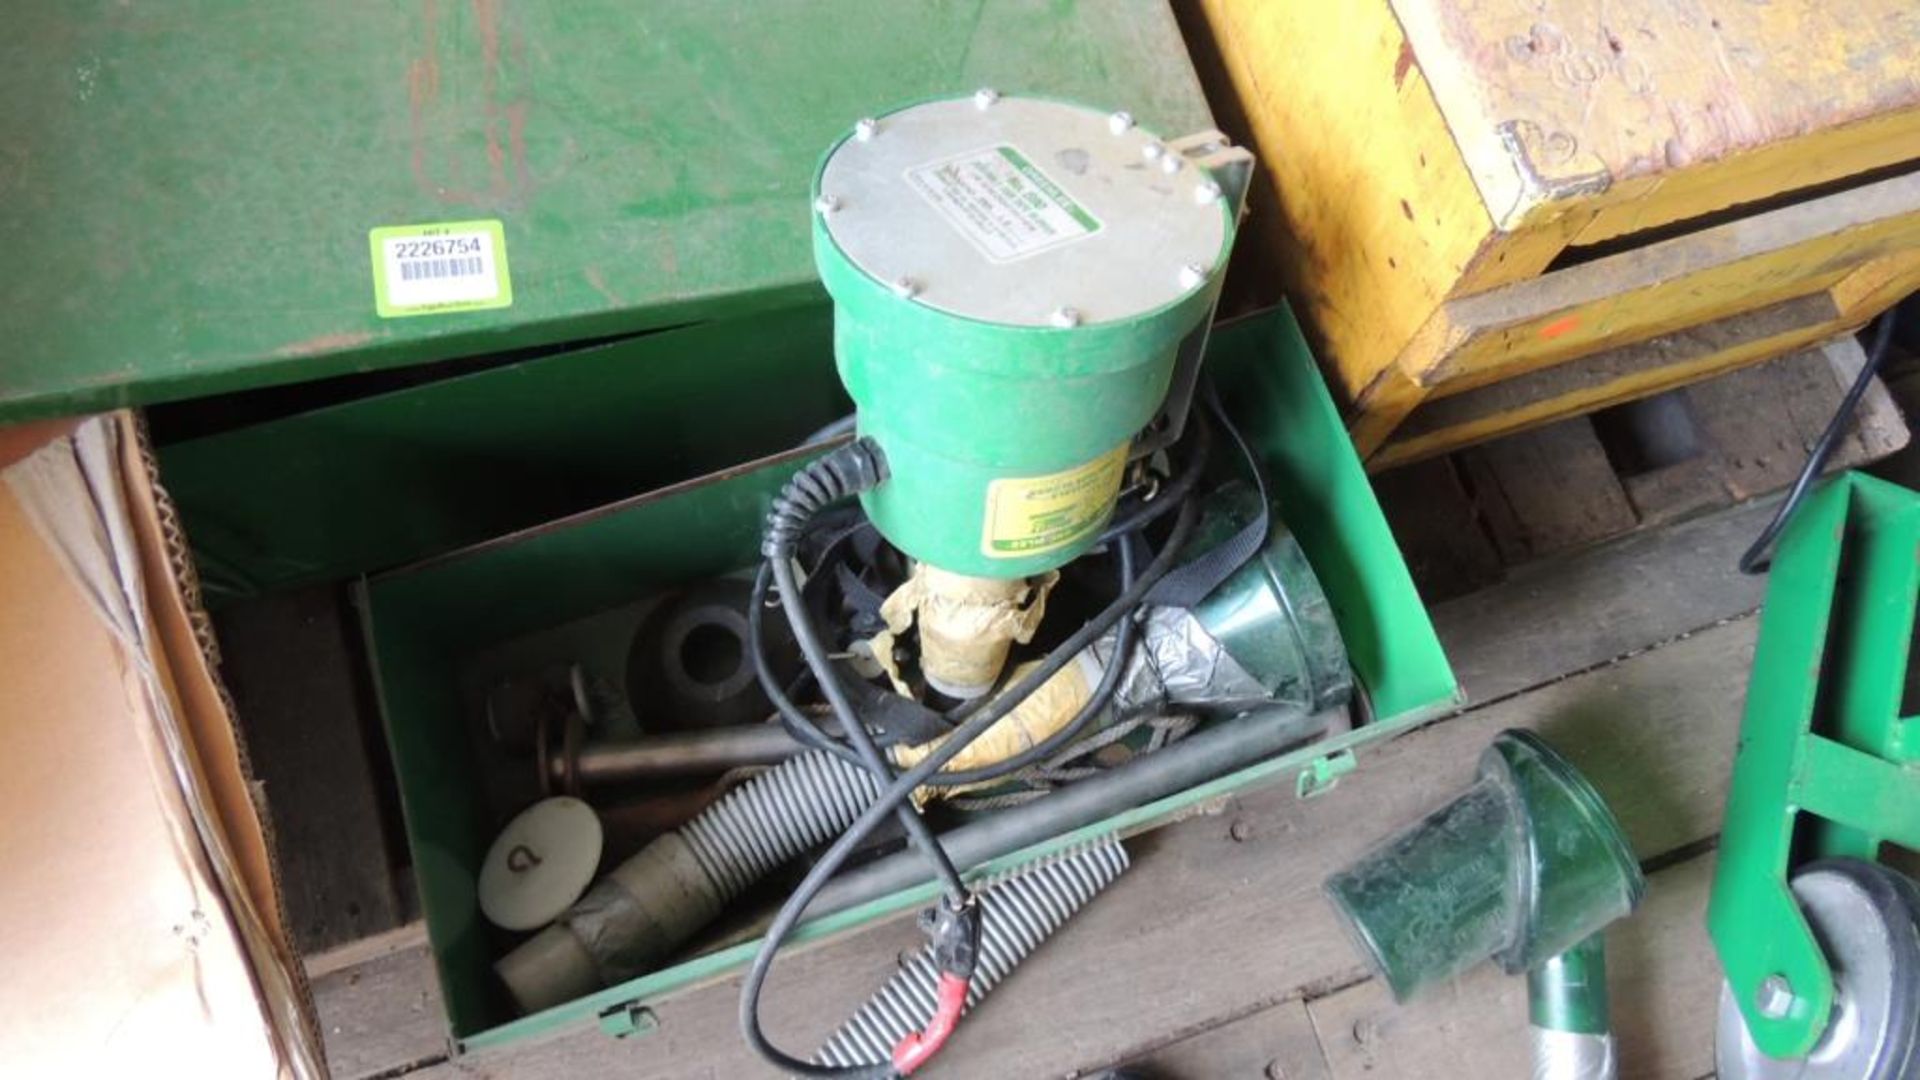 Greenlee 777 Bender; 1 1/2" to 4" also Greenlee No. 570 portable fish tape blower. HIT# 2226754.